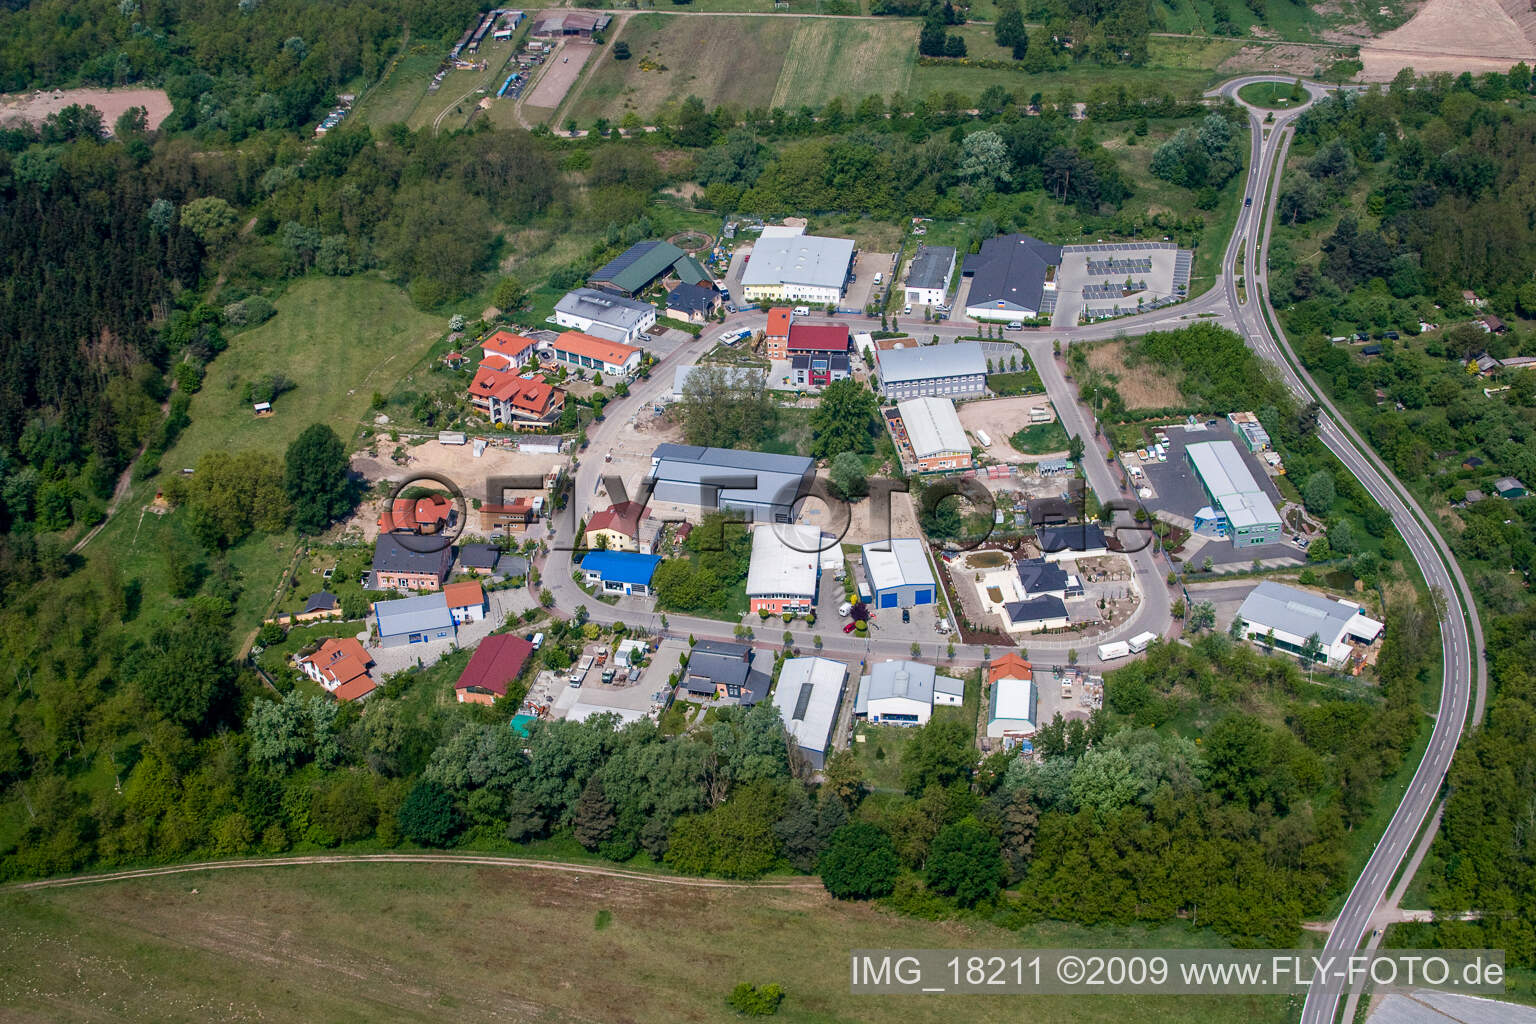 Aerial view of Industrial Estate in Jockgrim in the state Rhineland-Palatinate, Germany